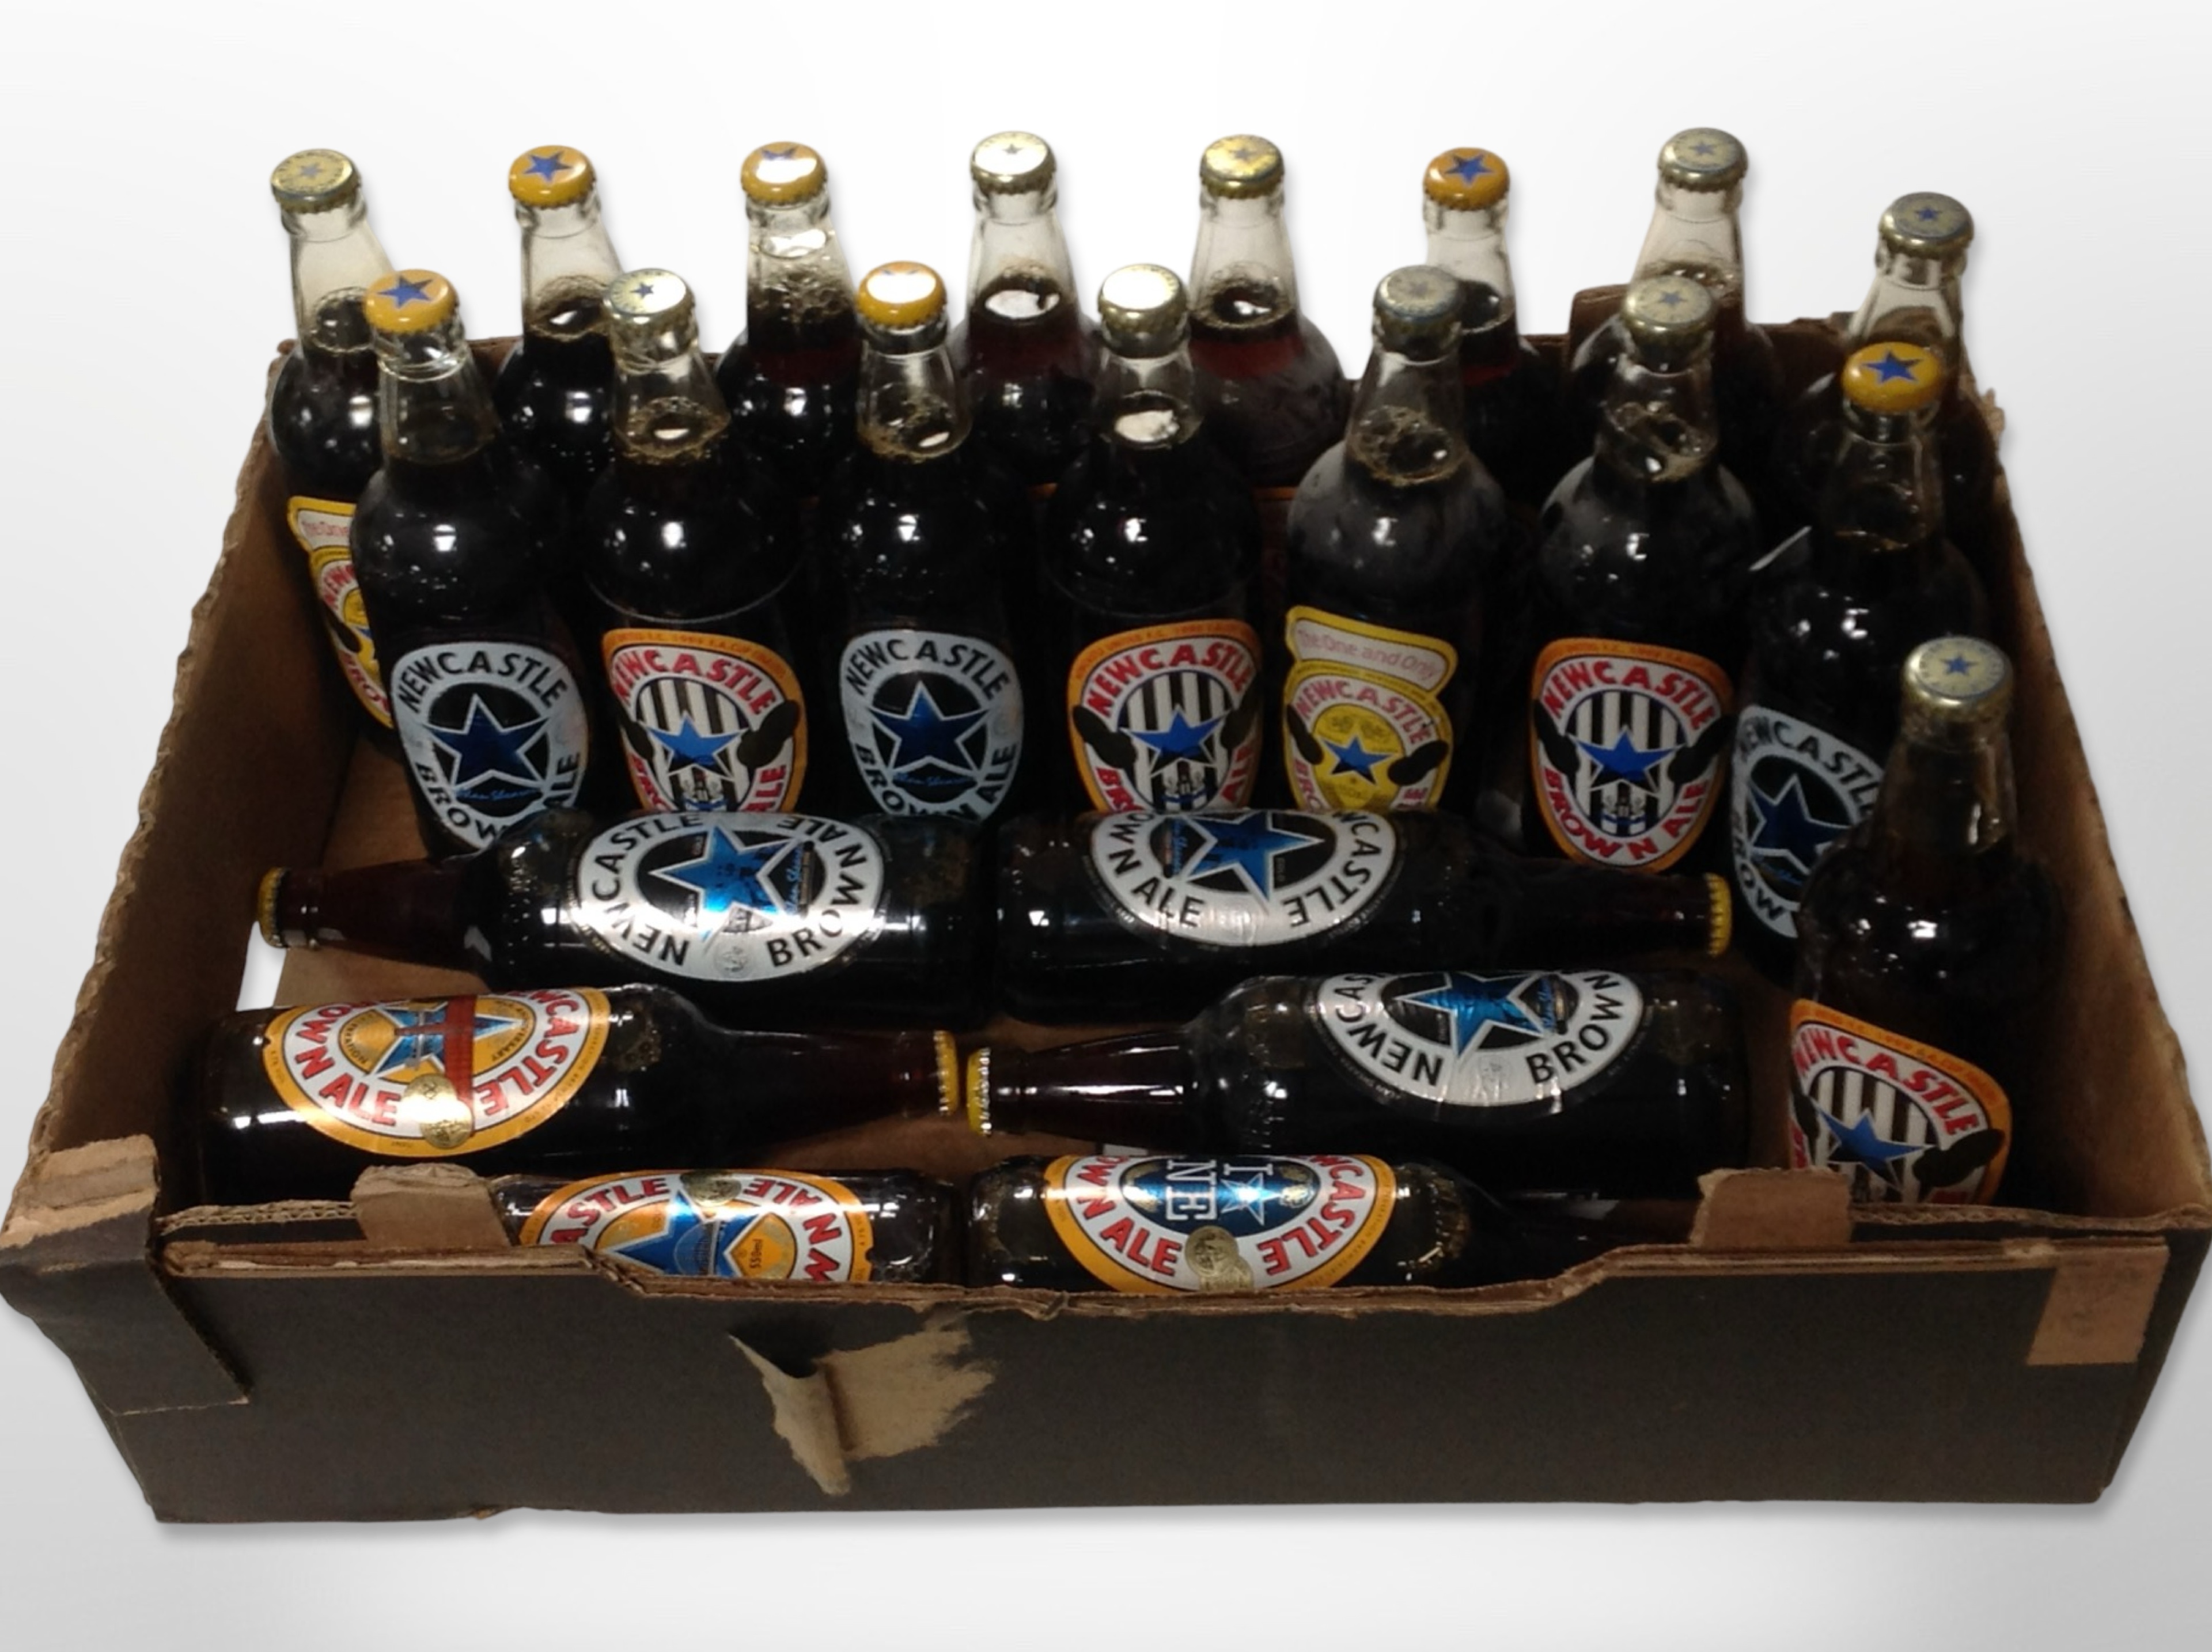 22 bottles of Newcastle Brown Ale.